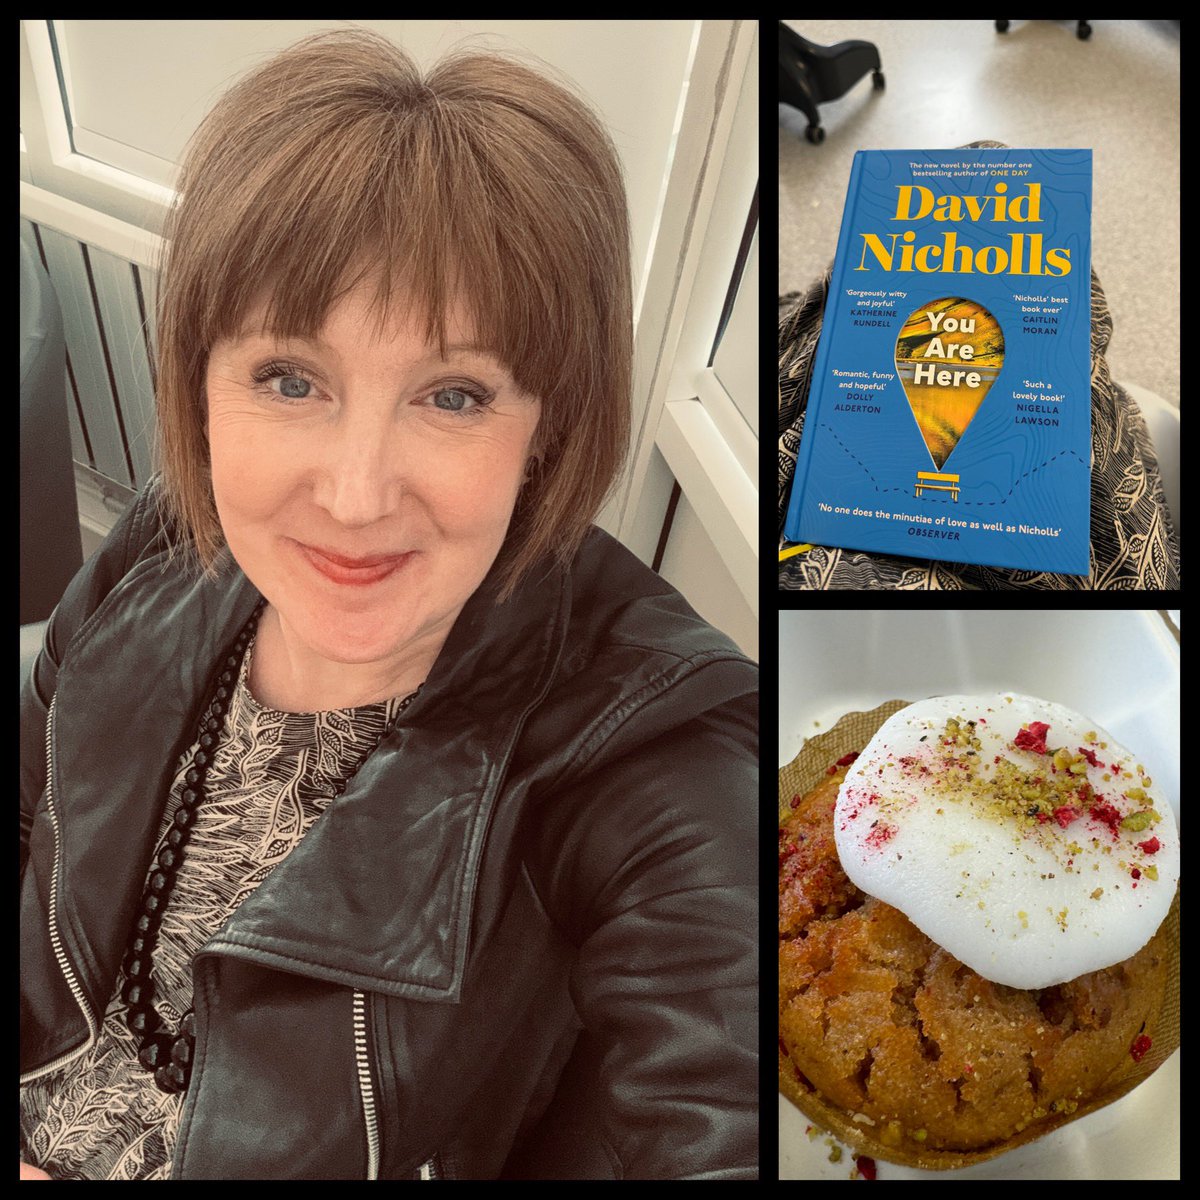 Just about to start immunotherapy treatment after a 3 month pause due to side effects. I’m feeling a bit anxious but I have cake, tea and @DavidNWriter’s new book so I can relax! #stage4 #melanoma #cancertreatment #favouriteauthor #hope